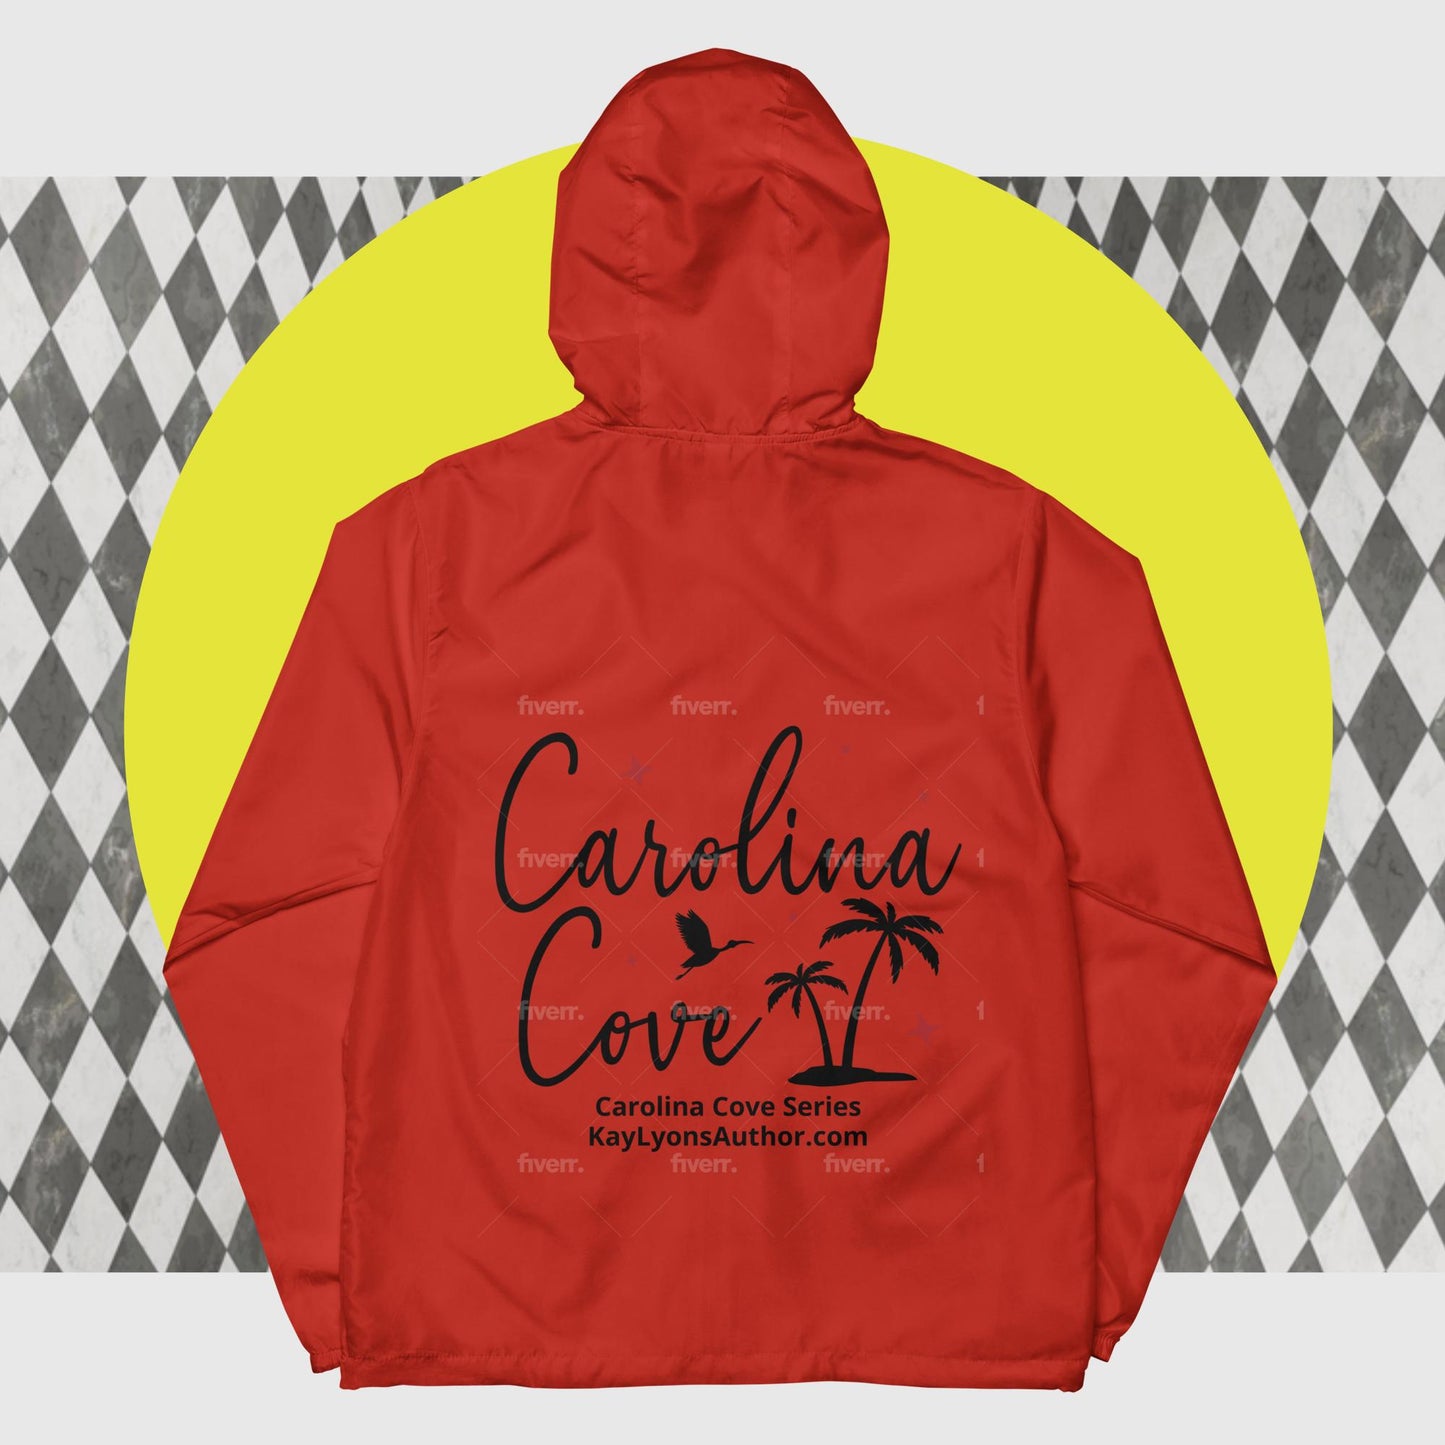 Unisex lightweight zip up windbreaker FEATURING CAROLINA COVE FROM THE CAROLINA COVE/MAKE ME A MATCH/SEASIDE SISTERS/BLACKWELL BROTHERS SERIES!